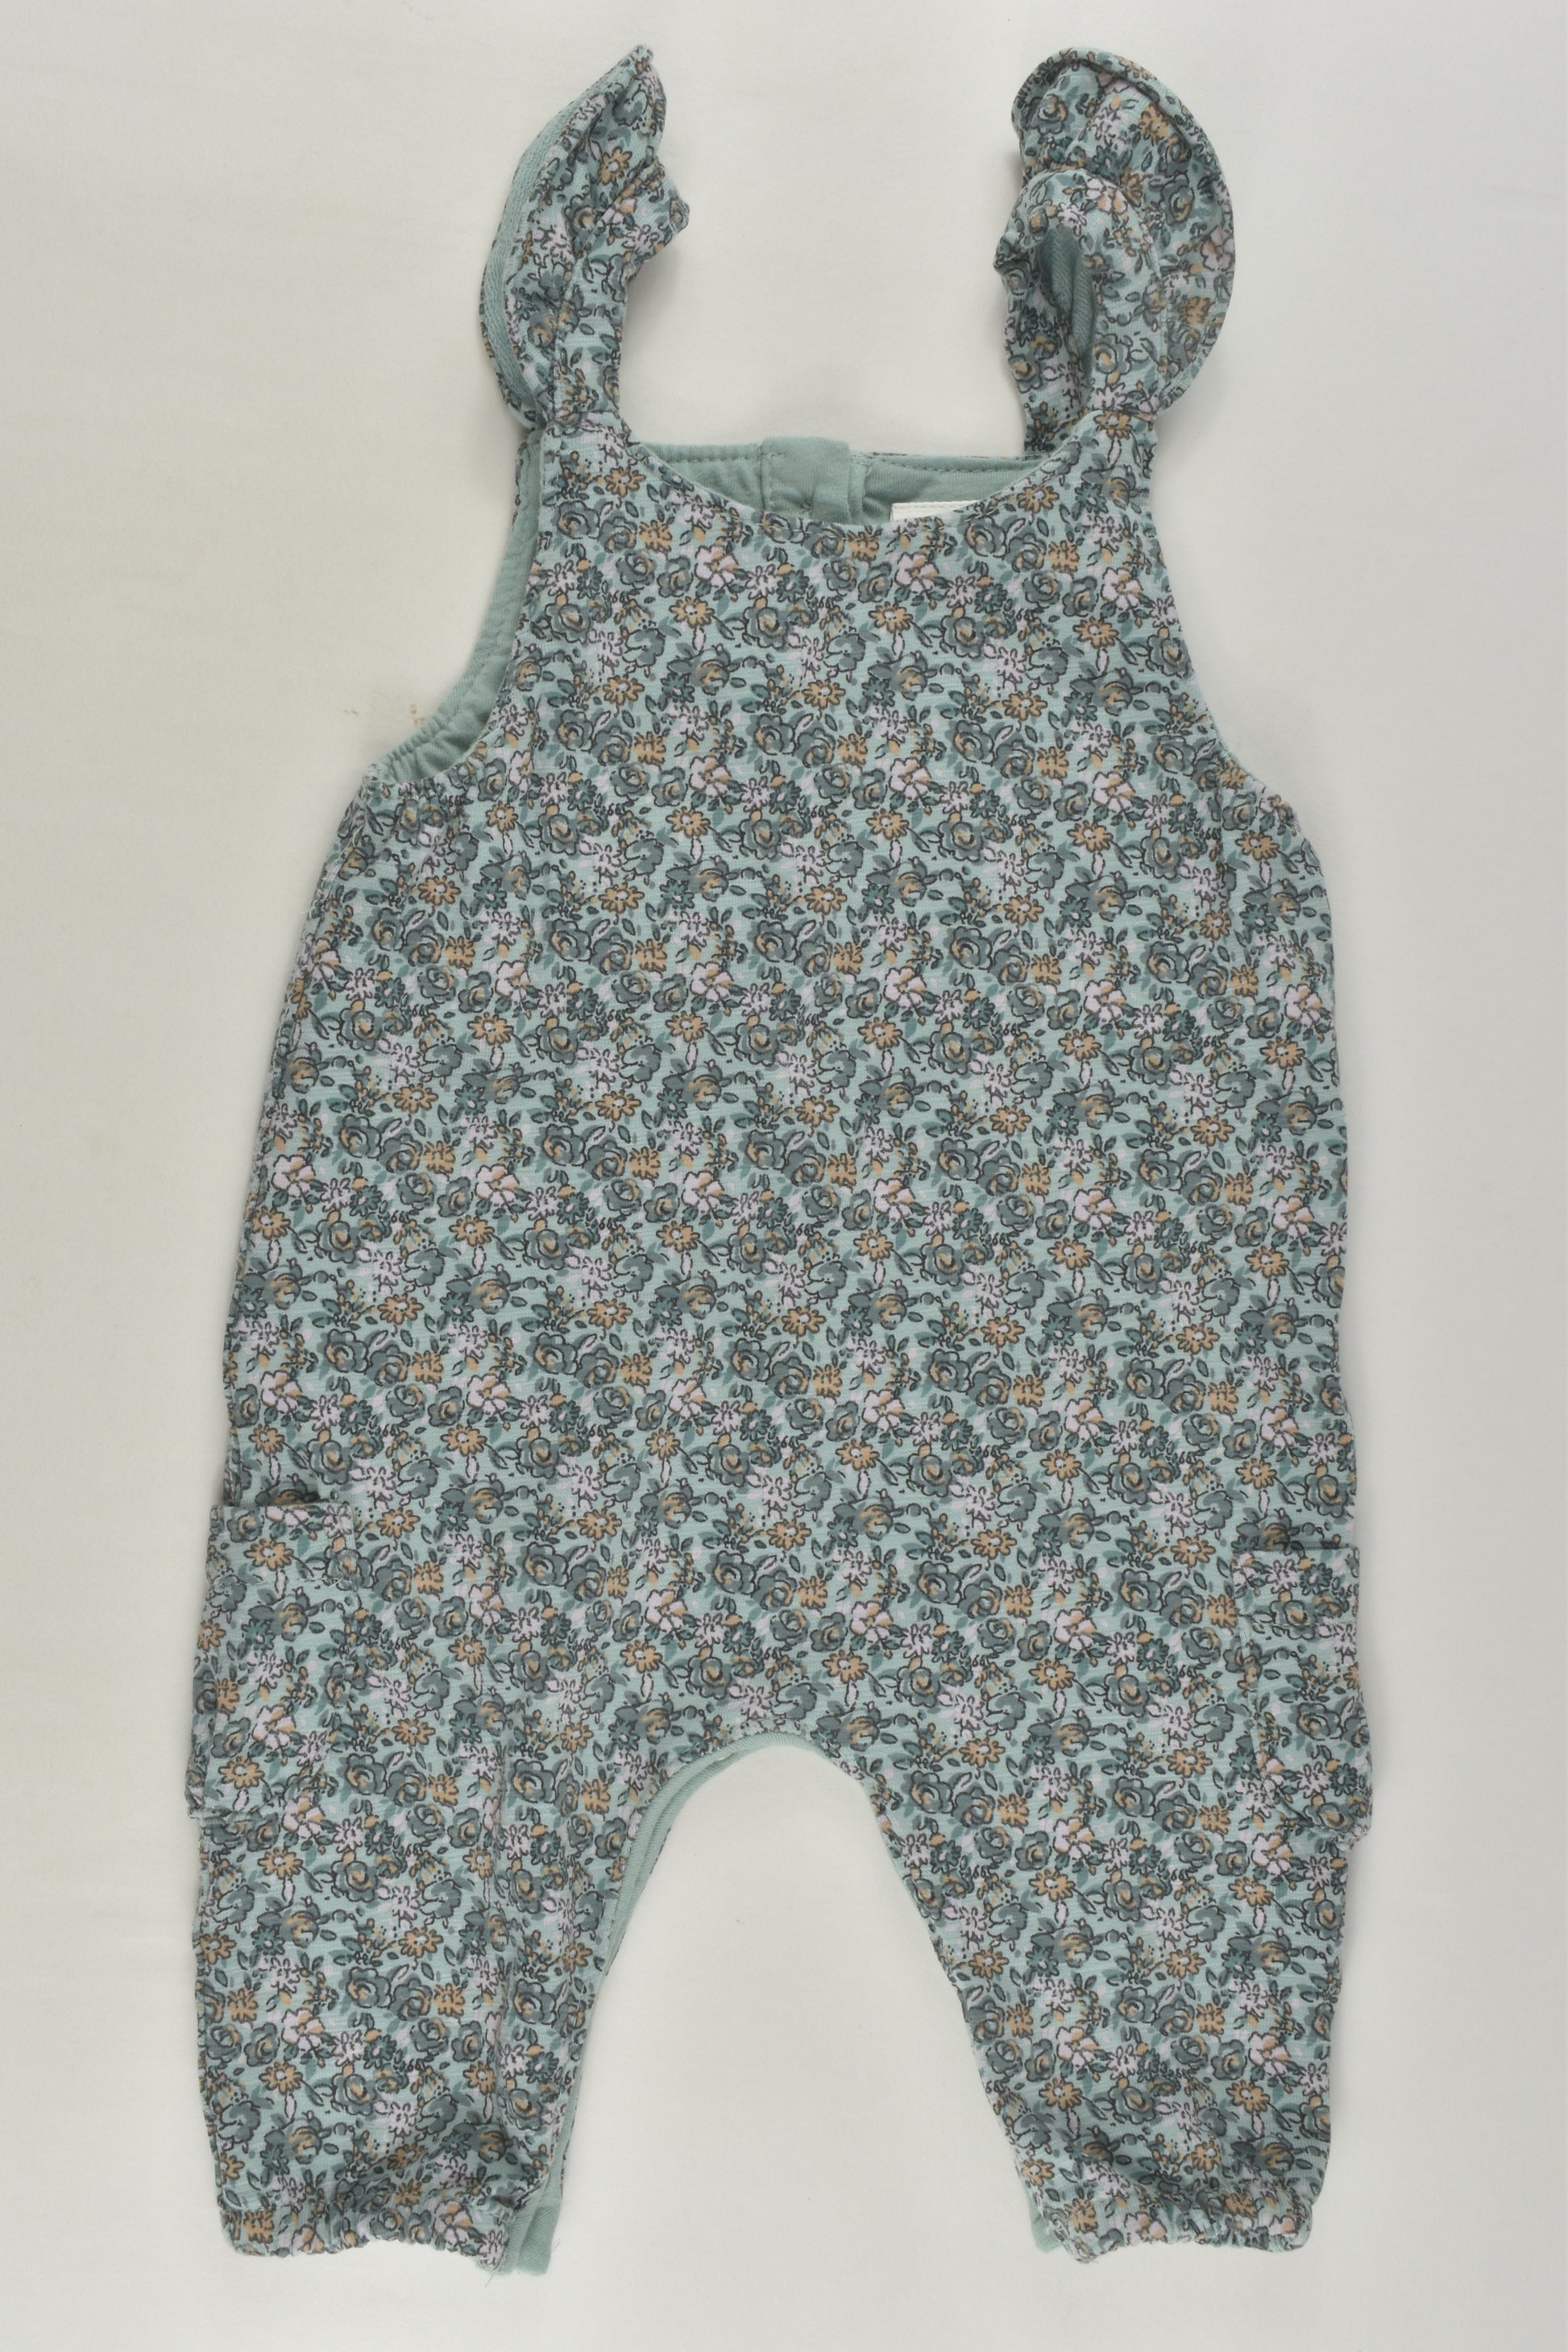 Next Size 000 (Up to 3 months) Liberty Print Overalls